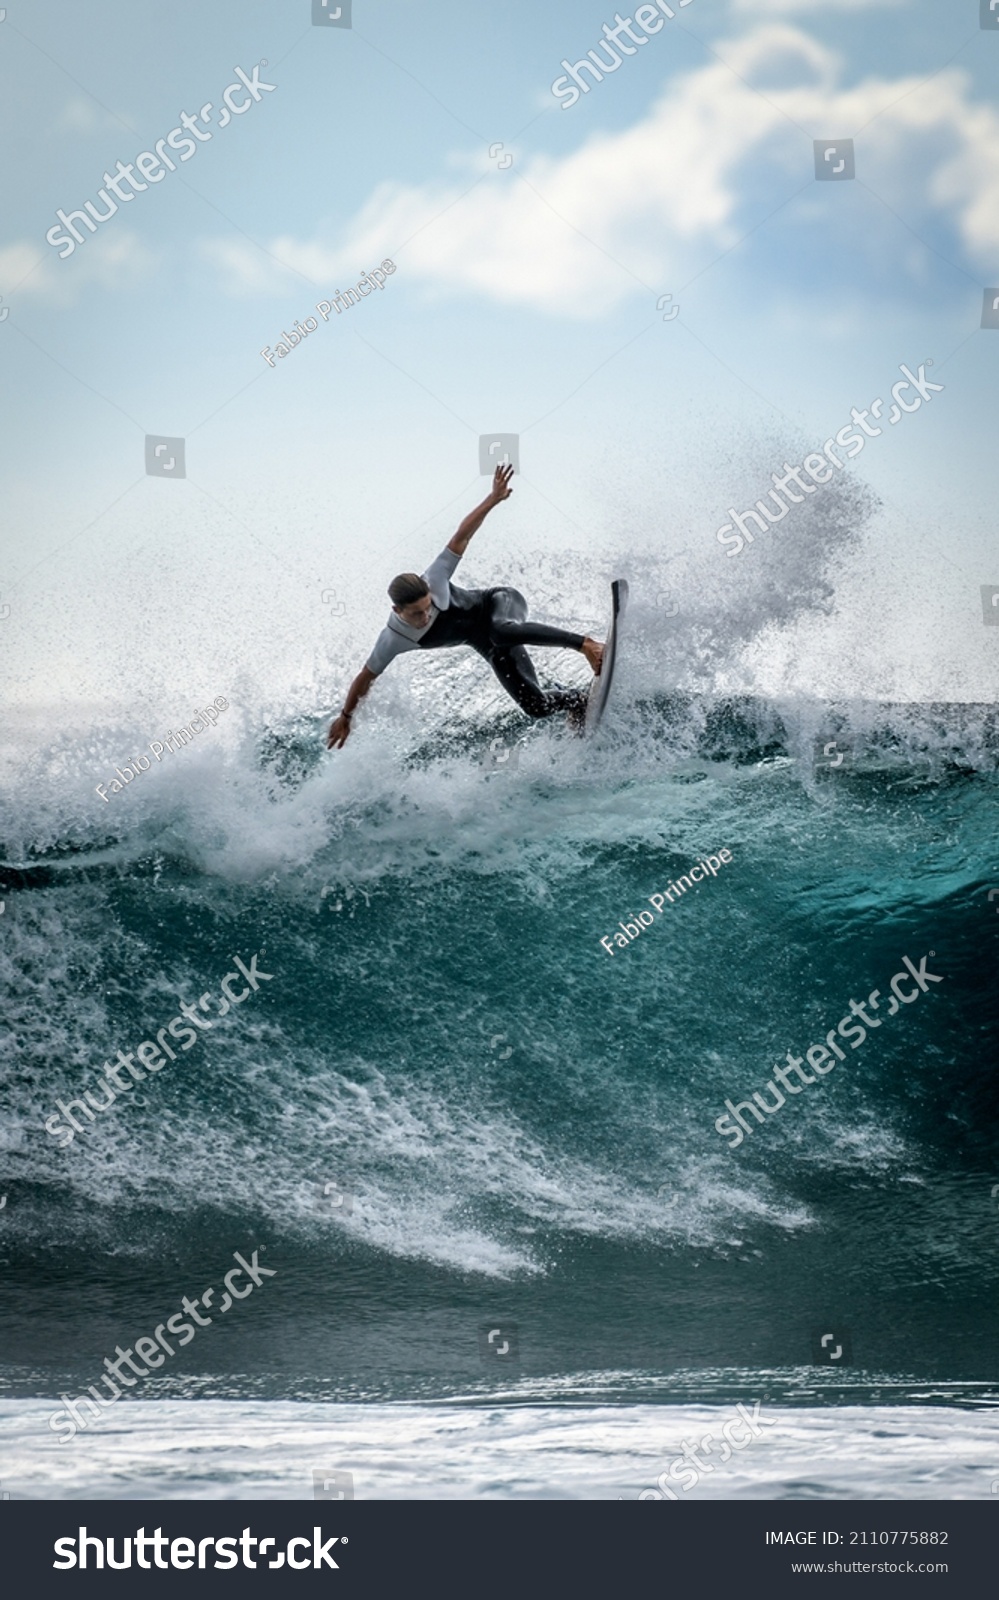 Young surfer with with wetsuit enjoying big waves in Tenerife, Canary Islands. Sporty boy riding his surf board on the ocean wave. Brave teenager making tricks on the rough sea during a competition. #2110775882